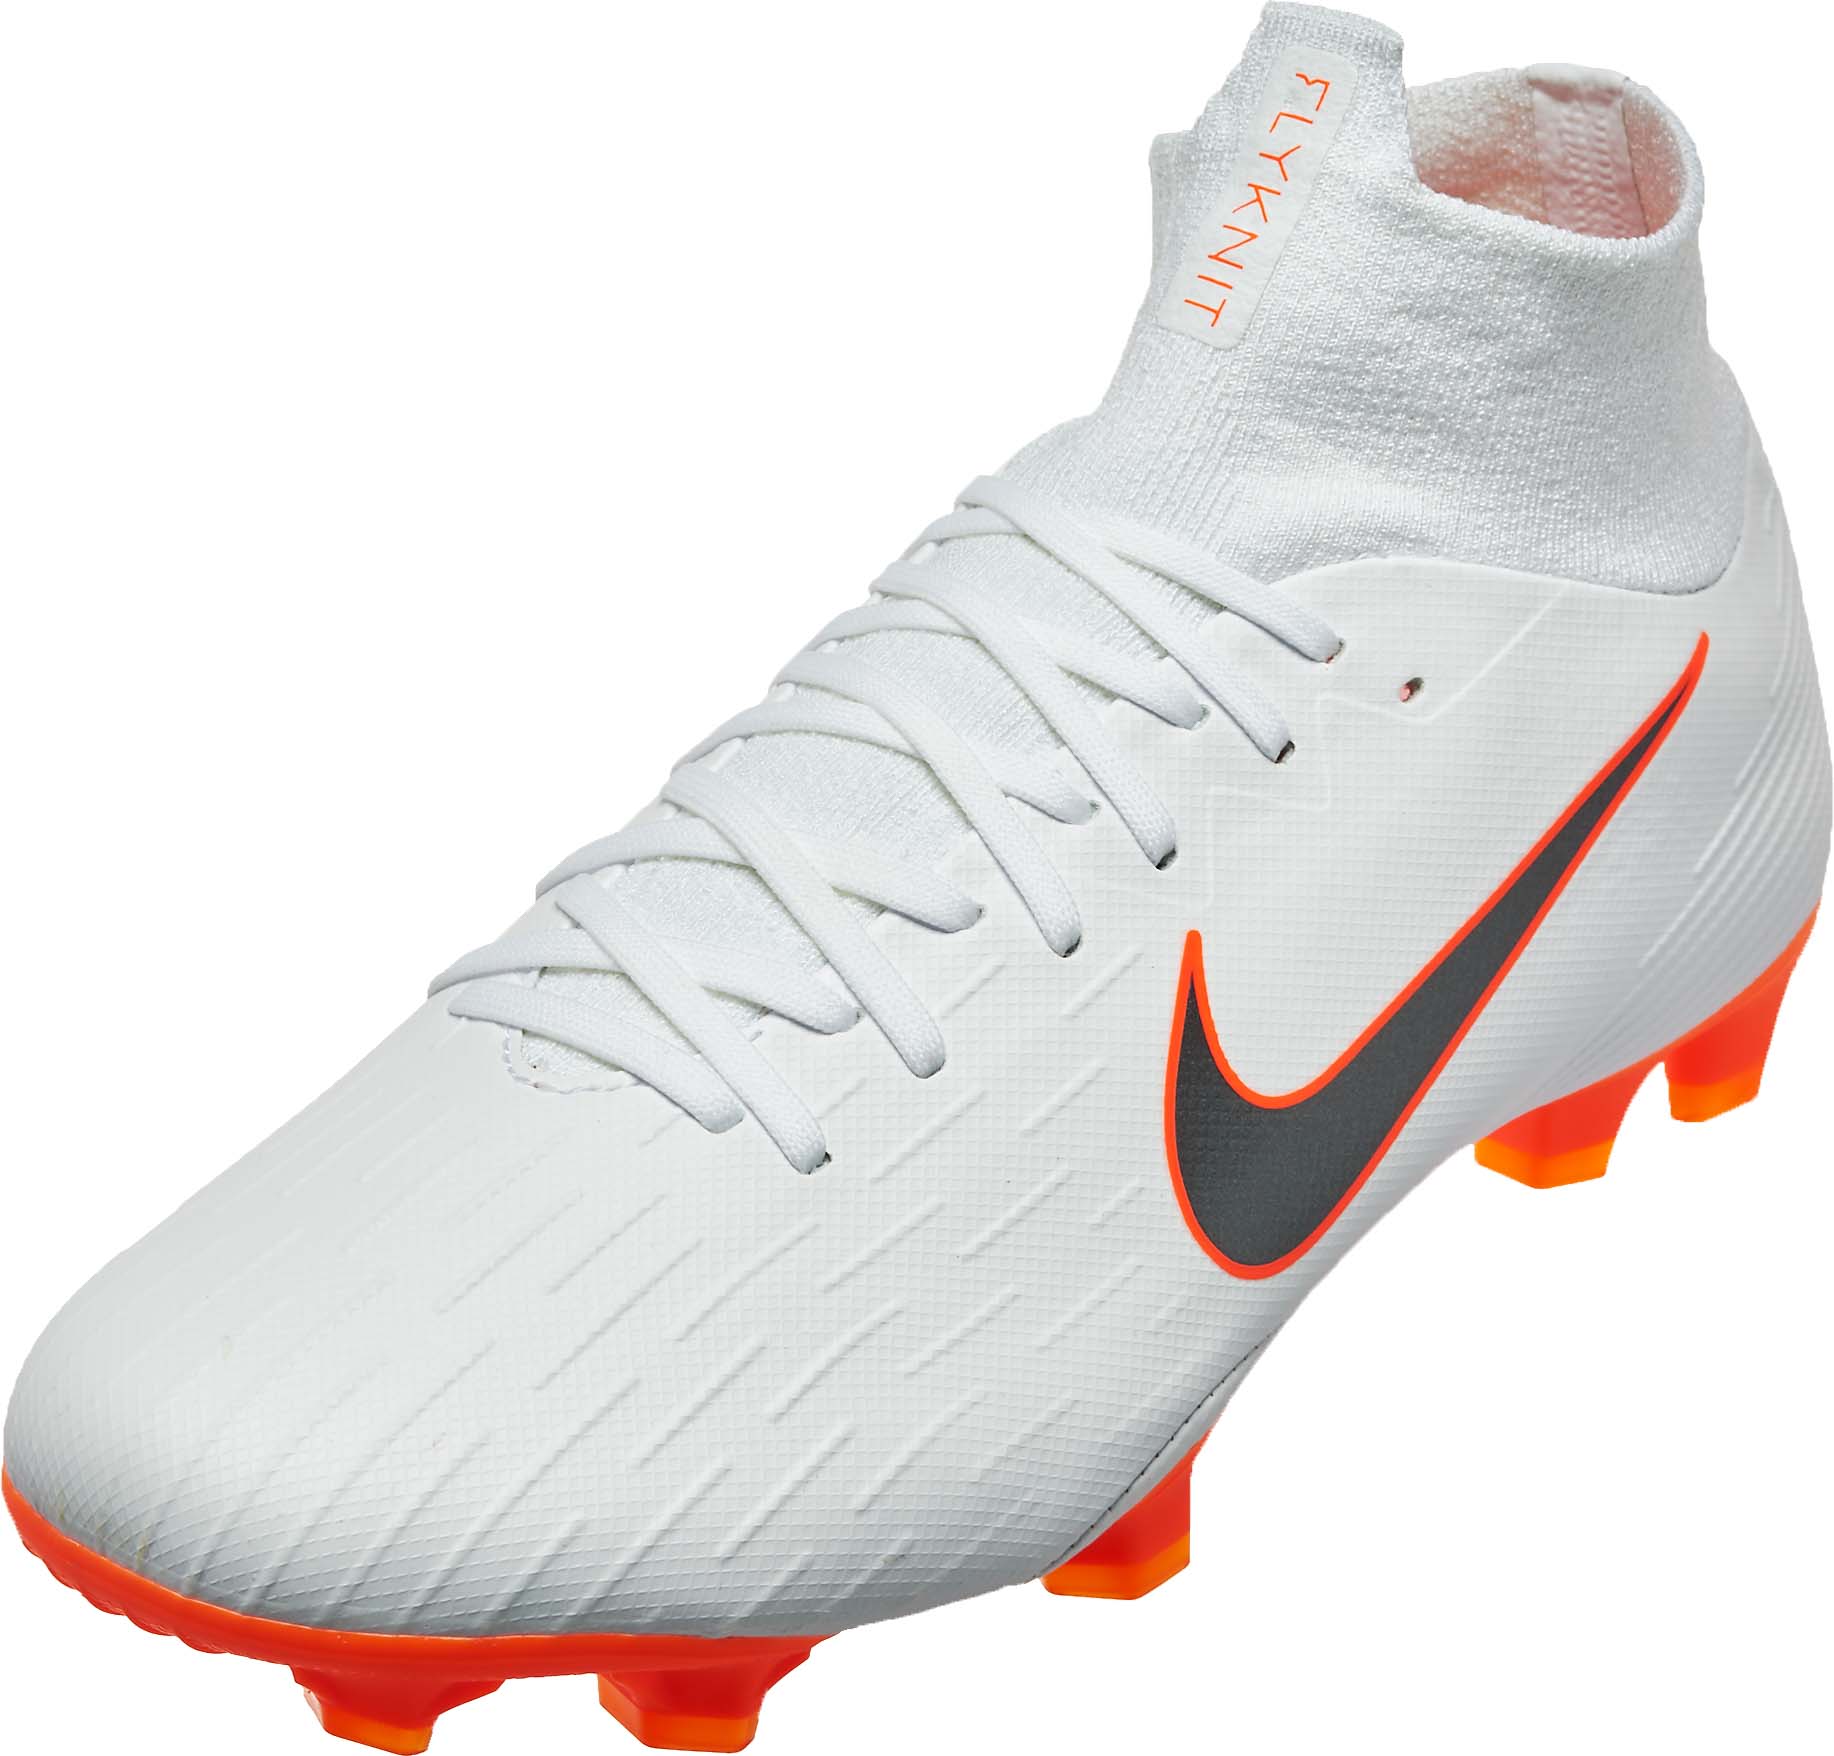 mercurial superfly 6 pro fg